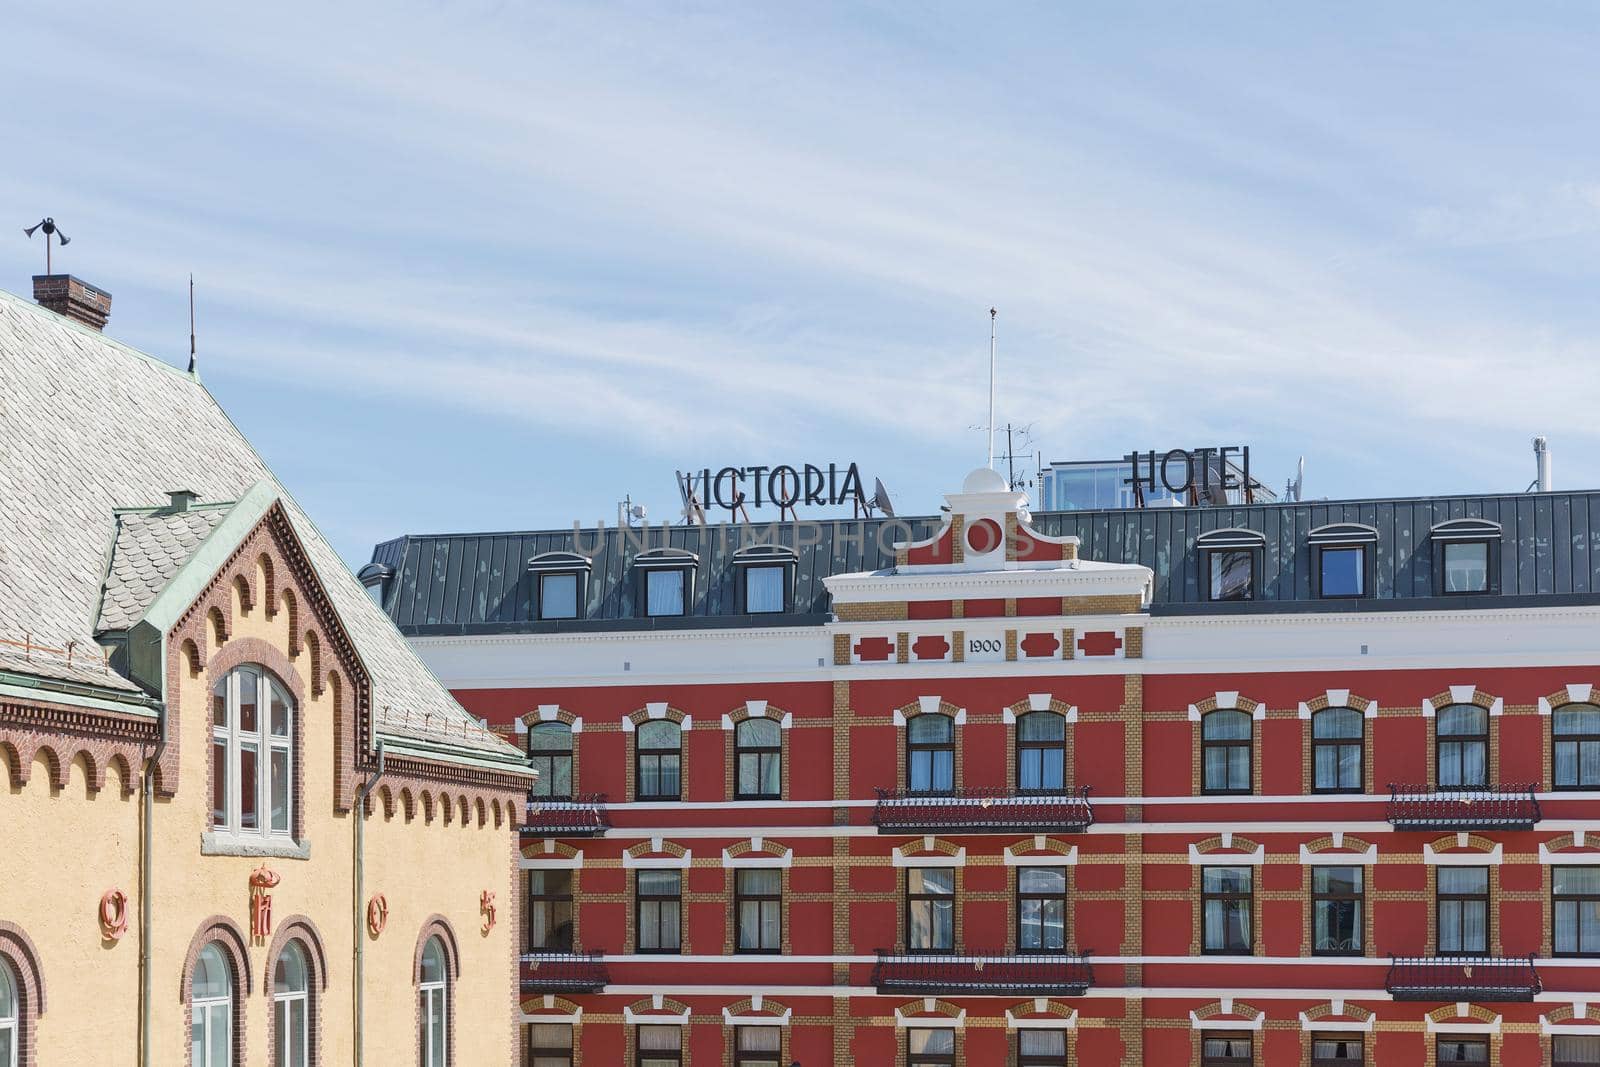 Hotel Victoria and architecture in the city of Stavanger in Norway by wondry